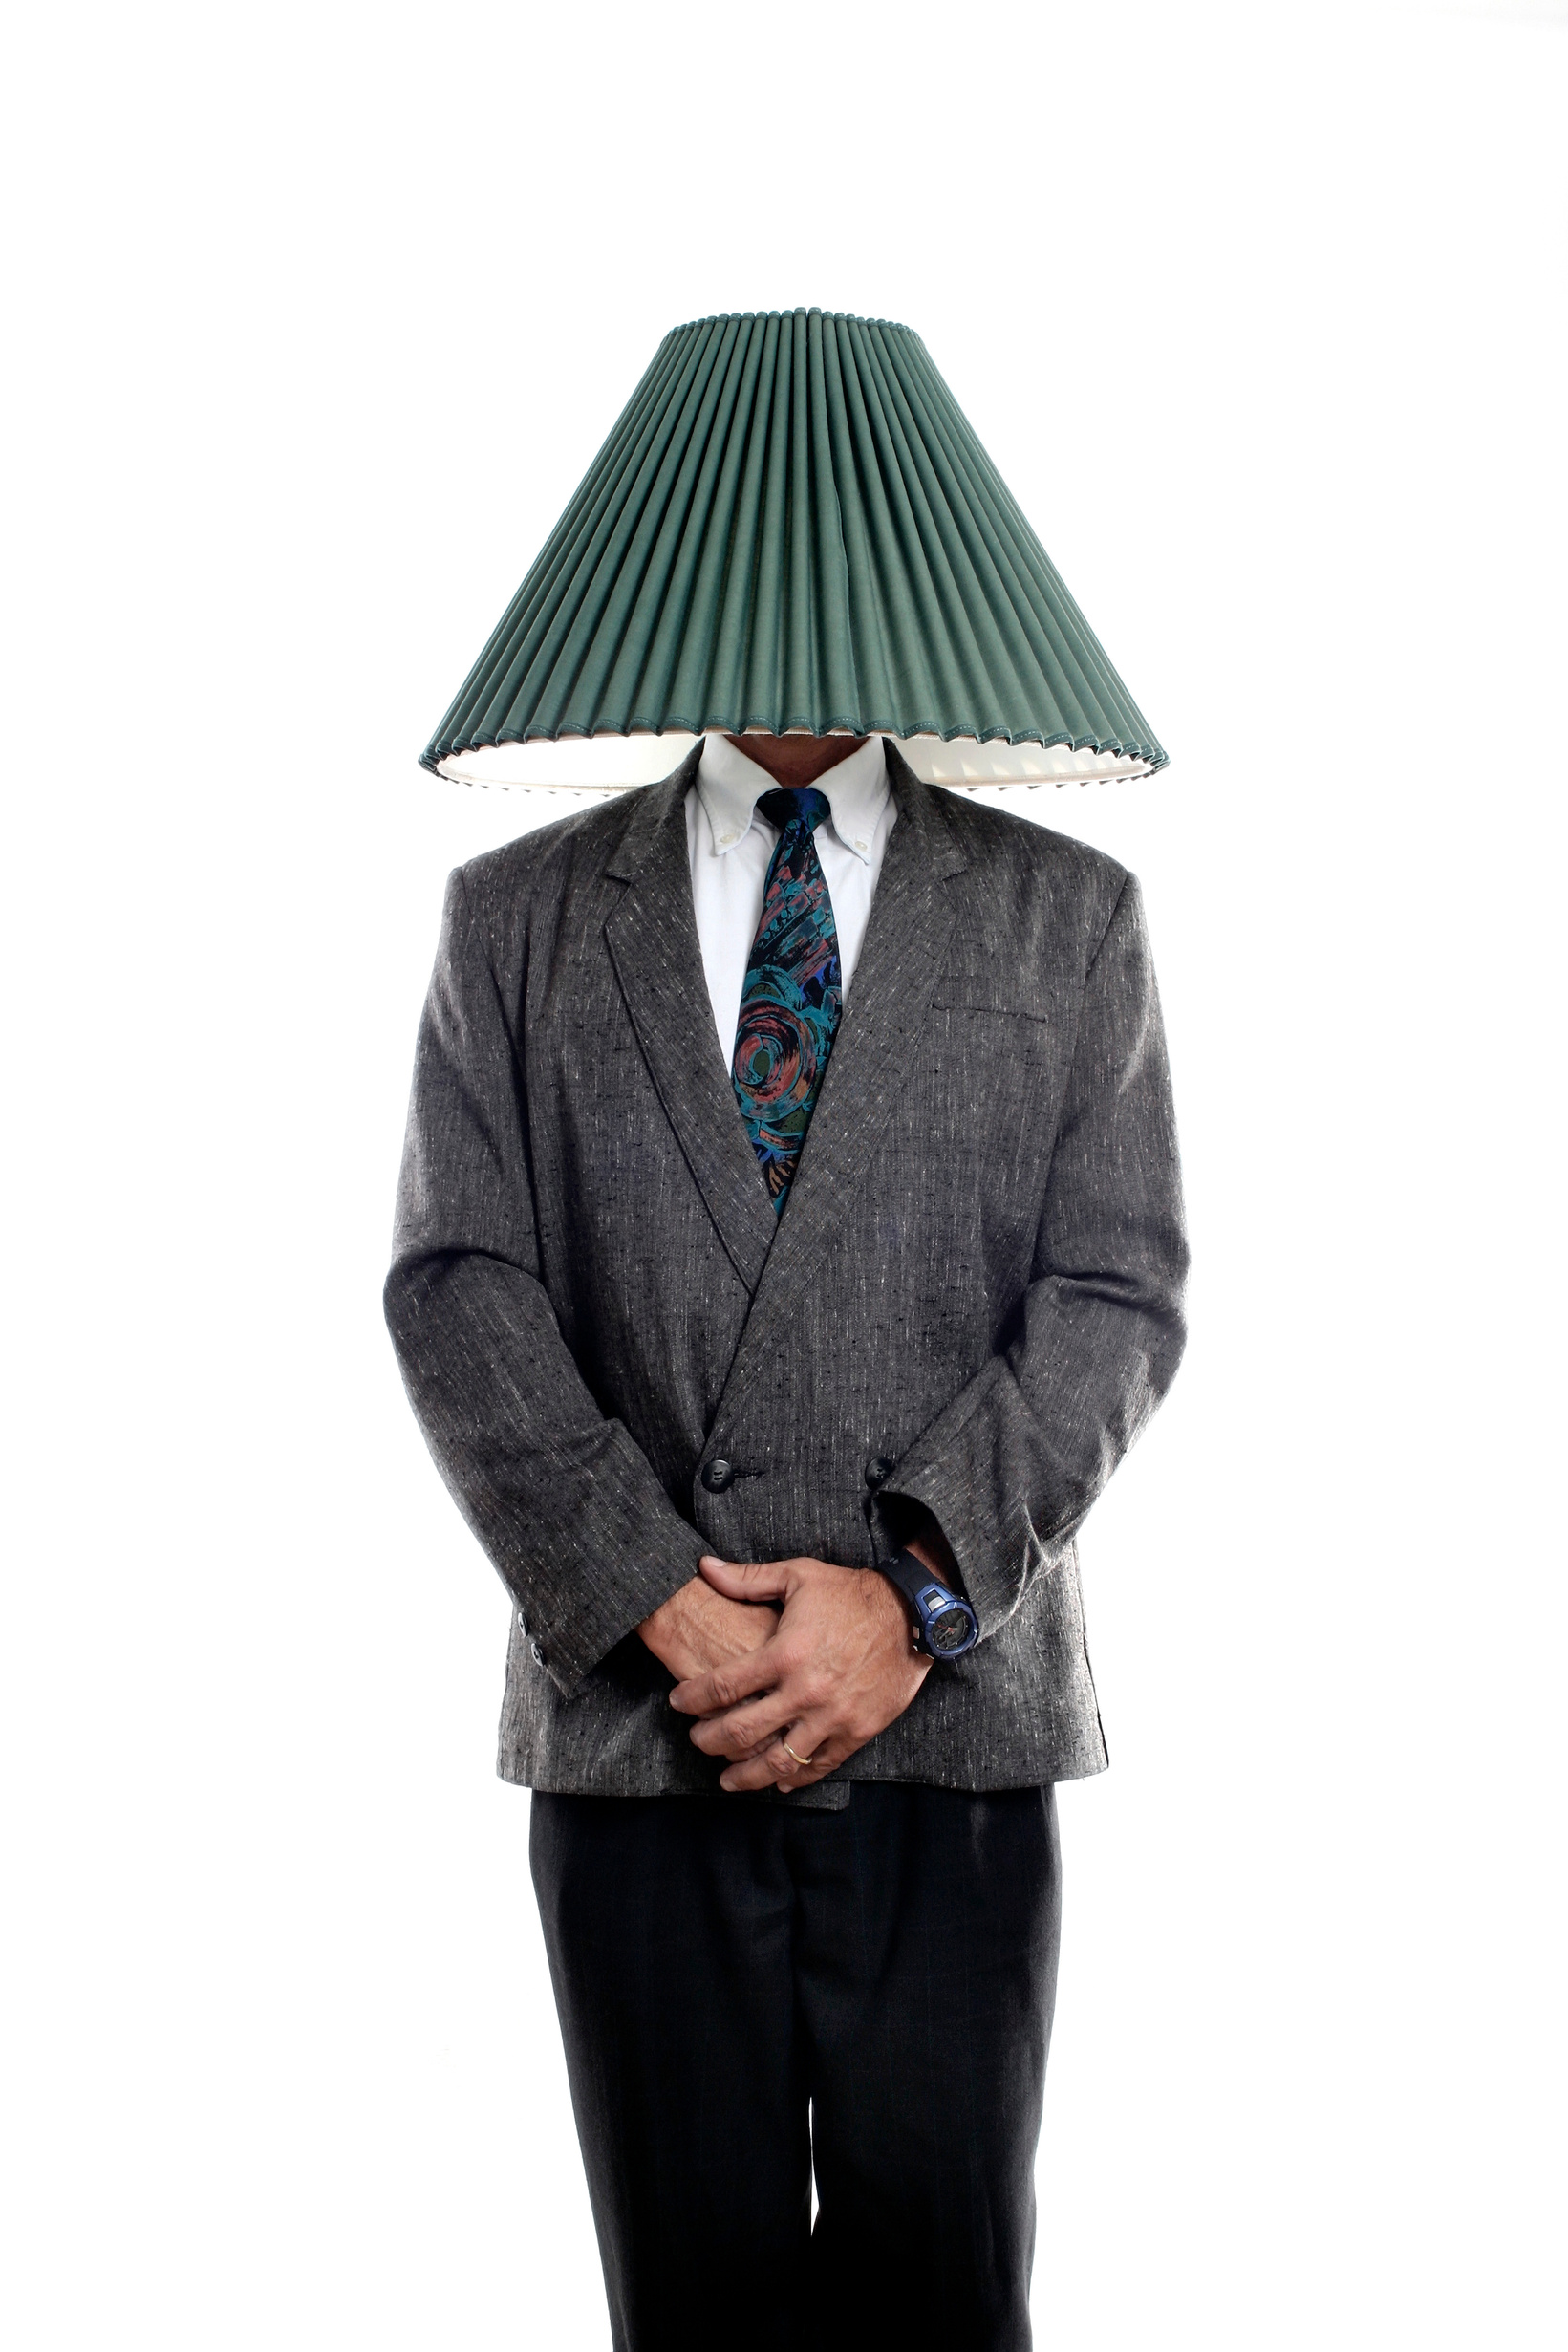 Businessman with a lamp shade covering his head